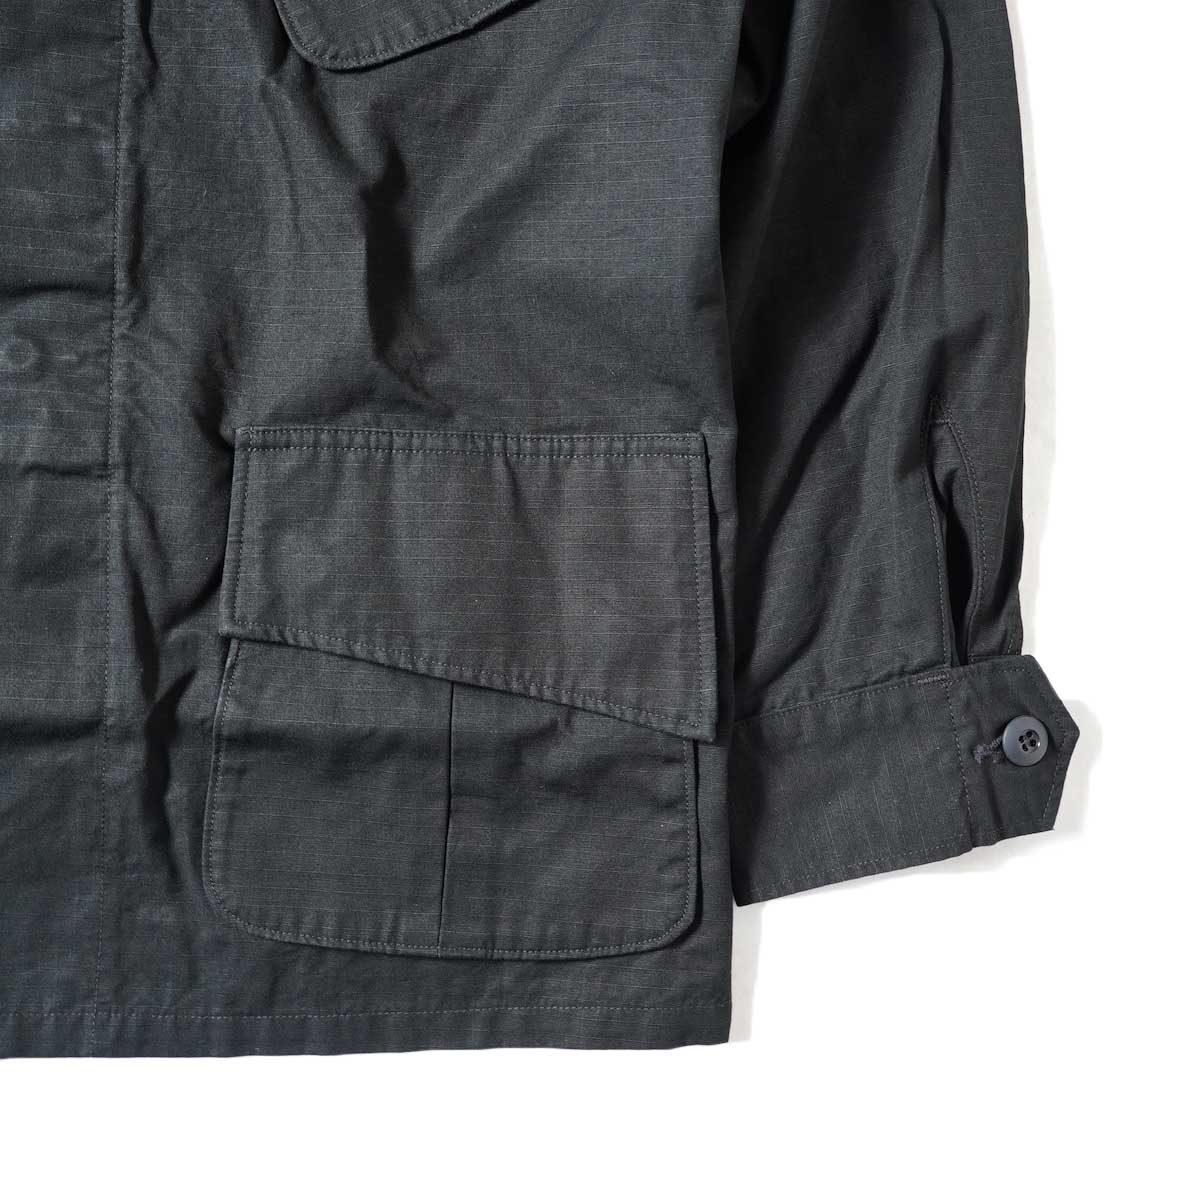 orSlow / US Army Tropical Jacket (Black Rip Stop) 裾、袖